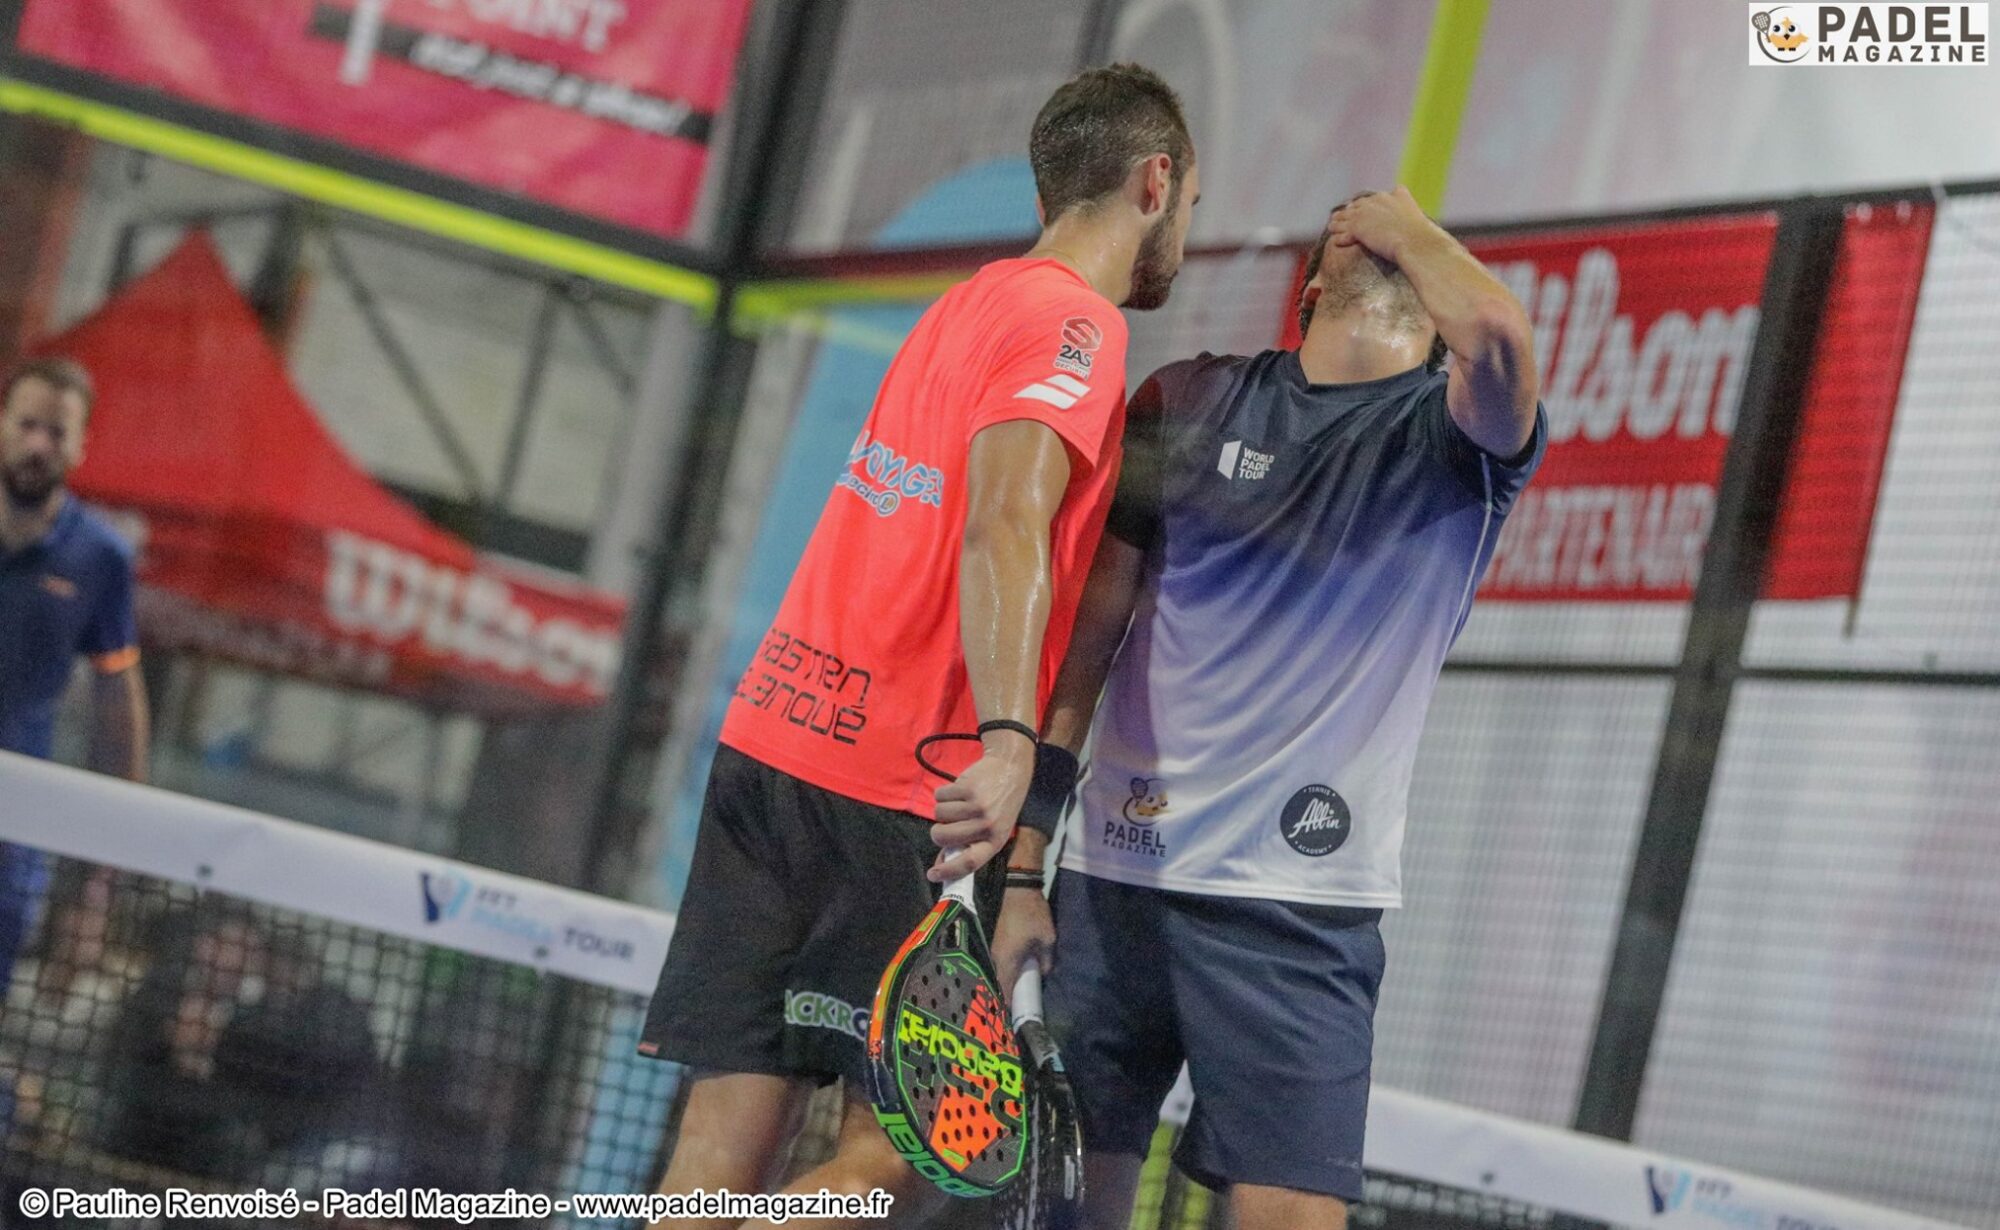 Le padel, an easy or complicated sport?